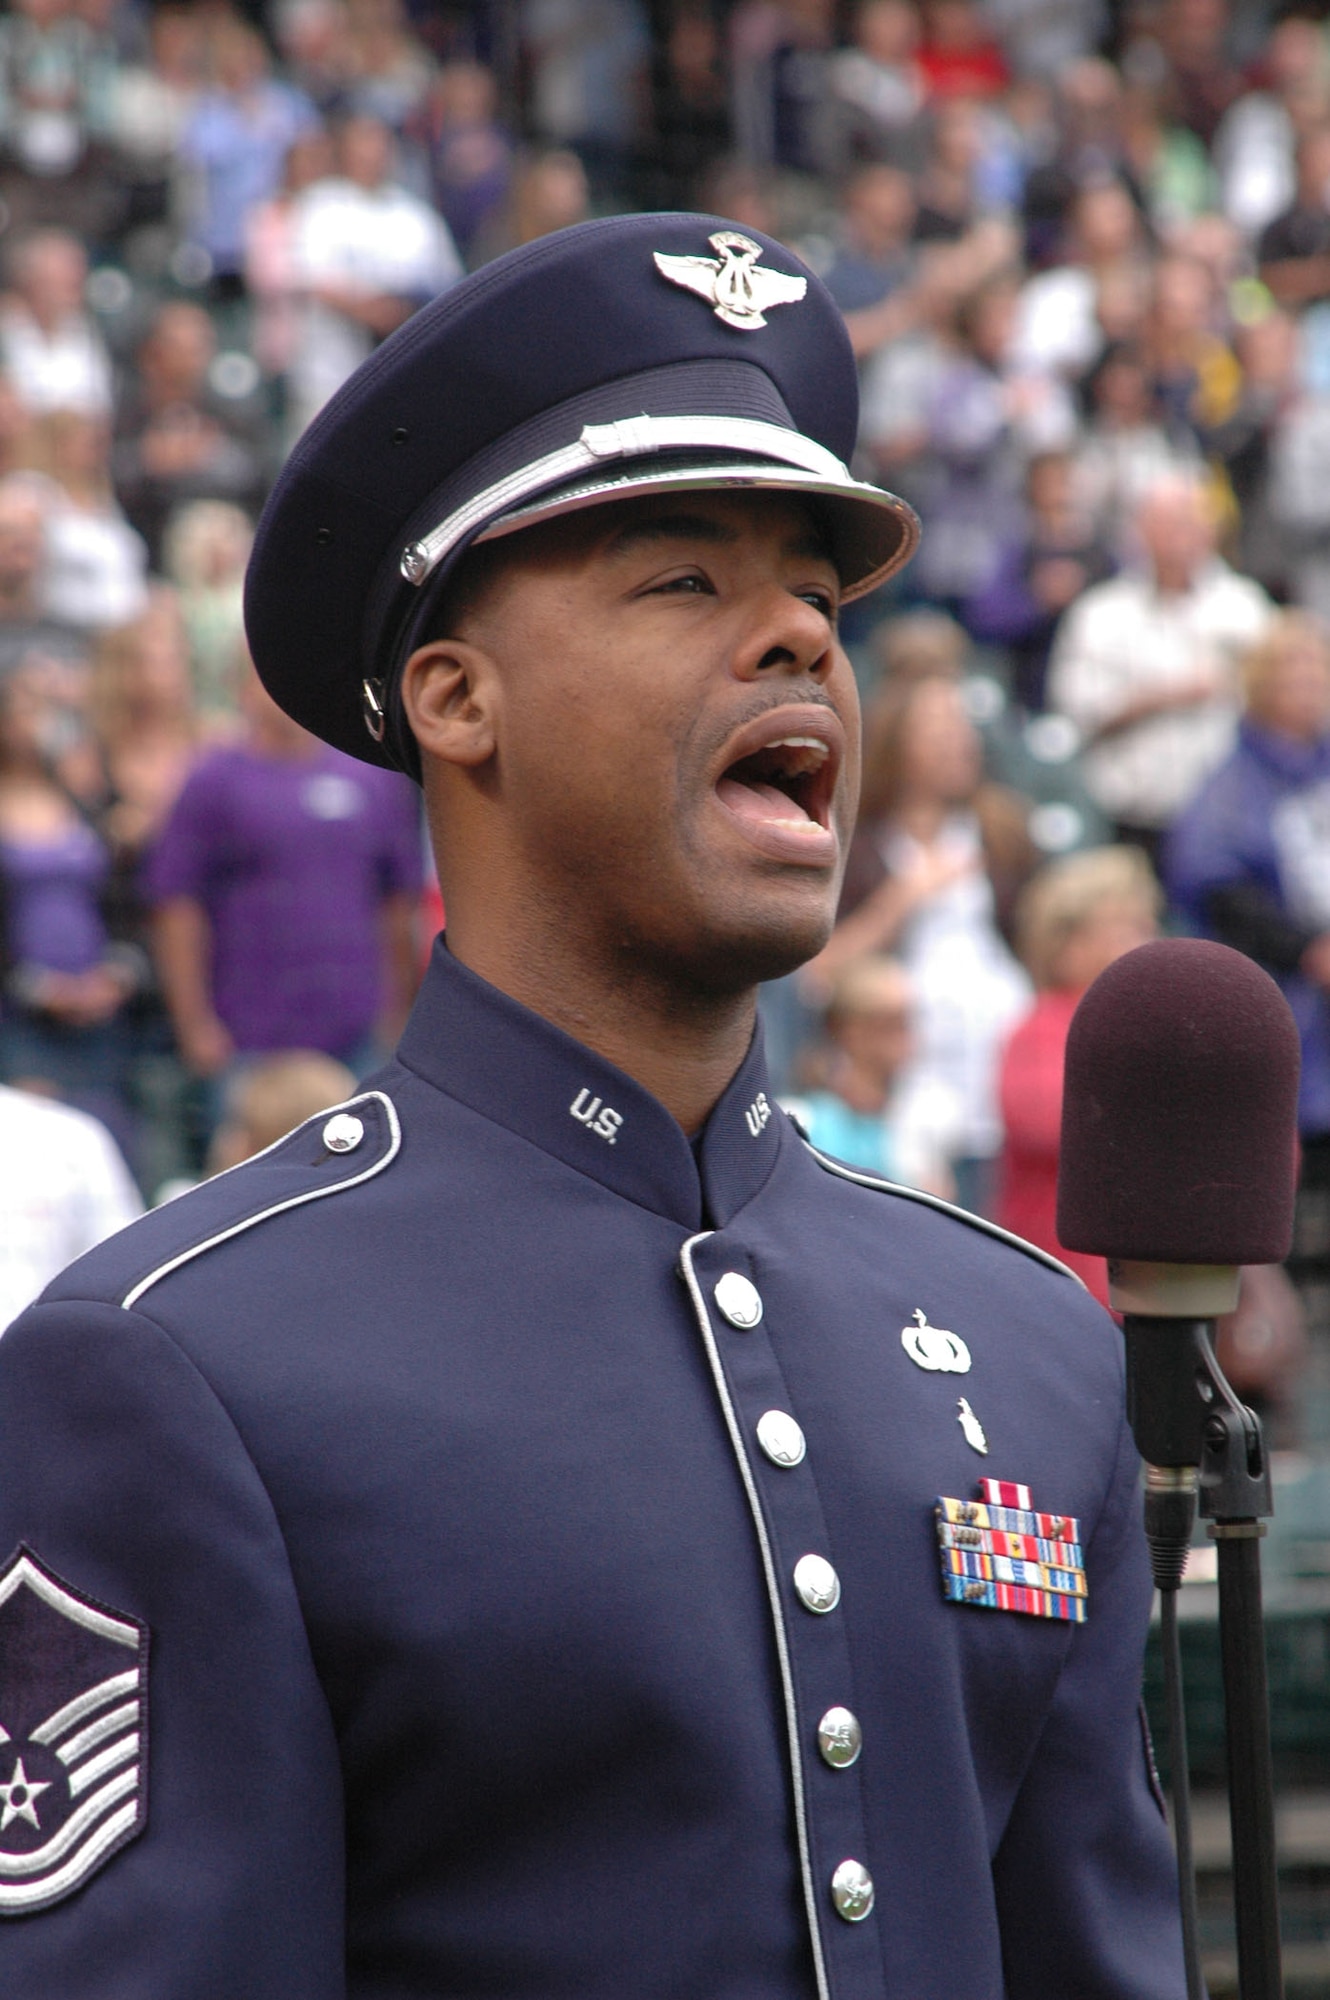 Master Sgt. Aaron Miles, a vocalist with the Air Force Reserve Command Band, sets a patriotic tone by singing the National Anthem July 4 at Coors Field in Denver. Sergeant Miles presented the Anthem in front of more than 51,000 fans, and during the game?s seventh-inning stretch, sang God Bless America to the roaring crowd in celebration of Independence Day. Coors Field is home to the Major League Baseball's Colorado Rockies. (U.S. Air Force photo/Ann Skarban)